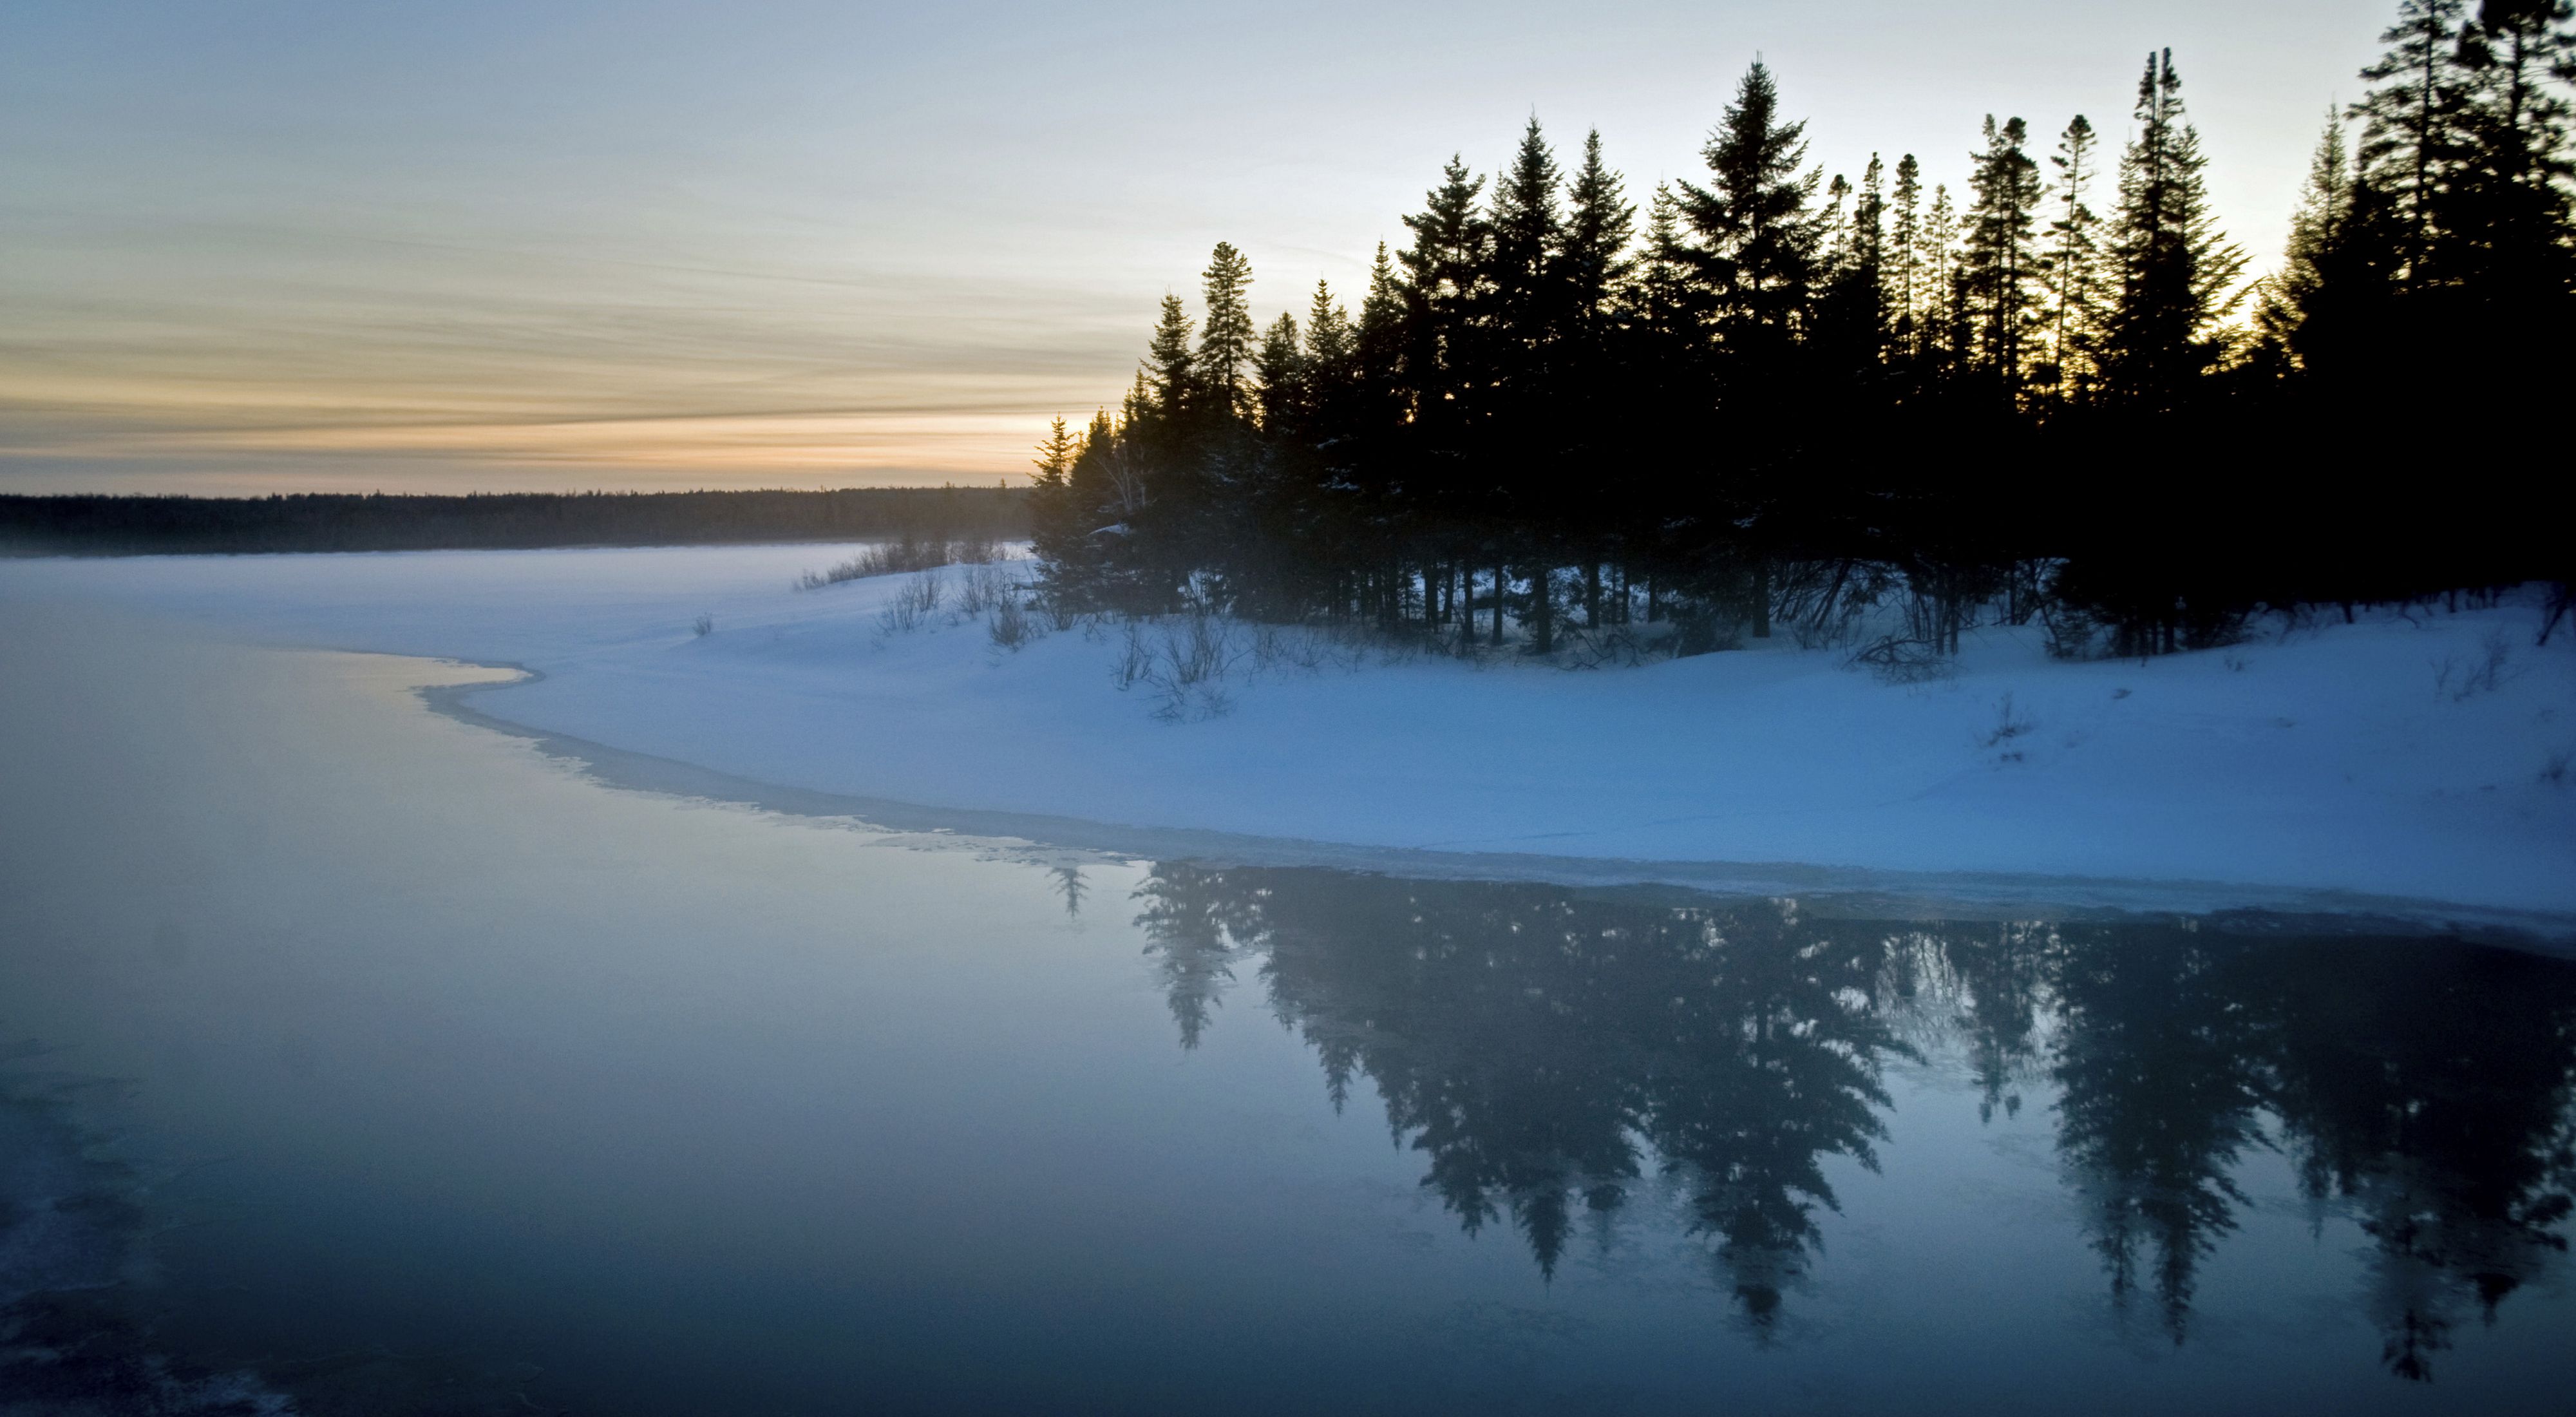 dusk on an open river bordered by snowy bank and evergreen trees